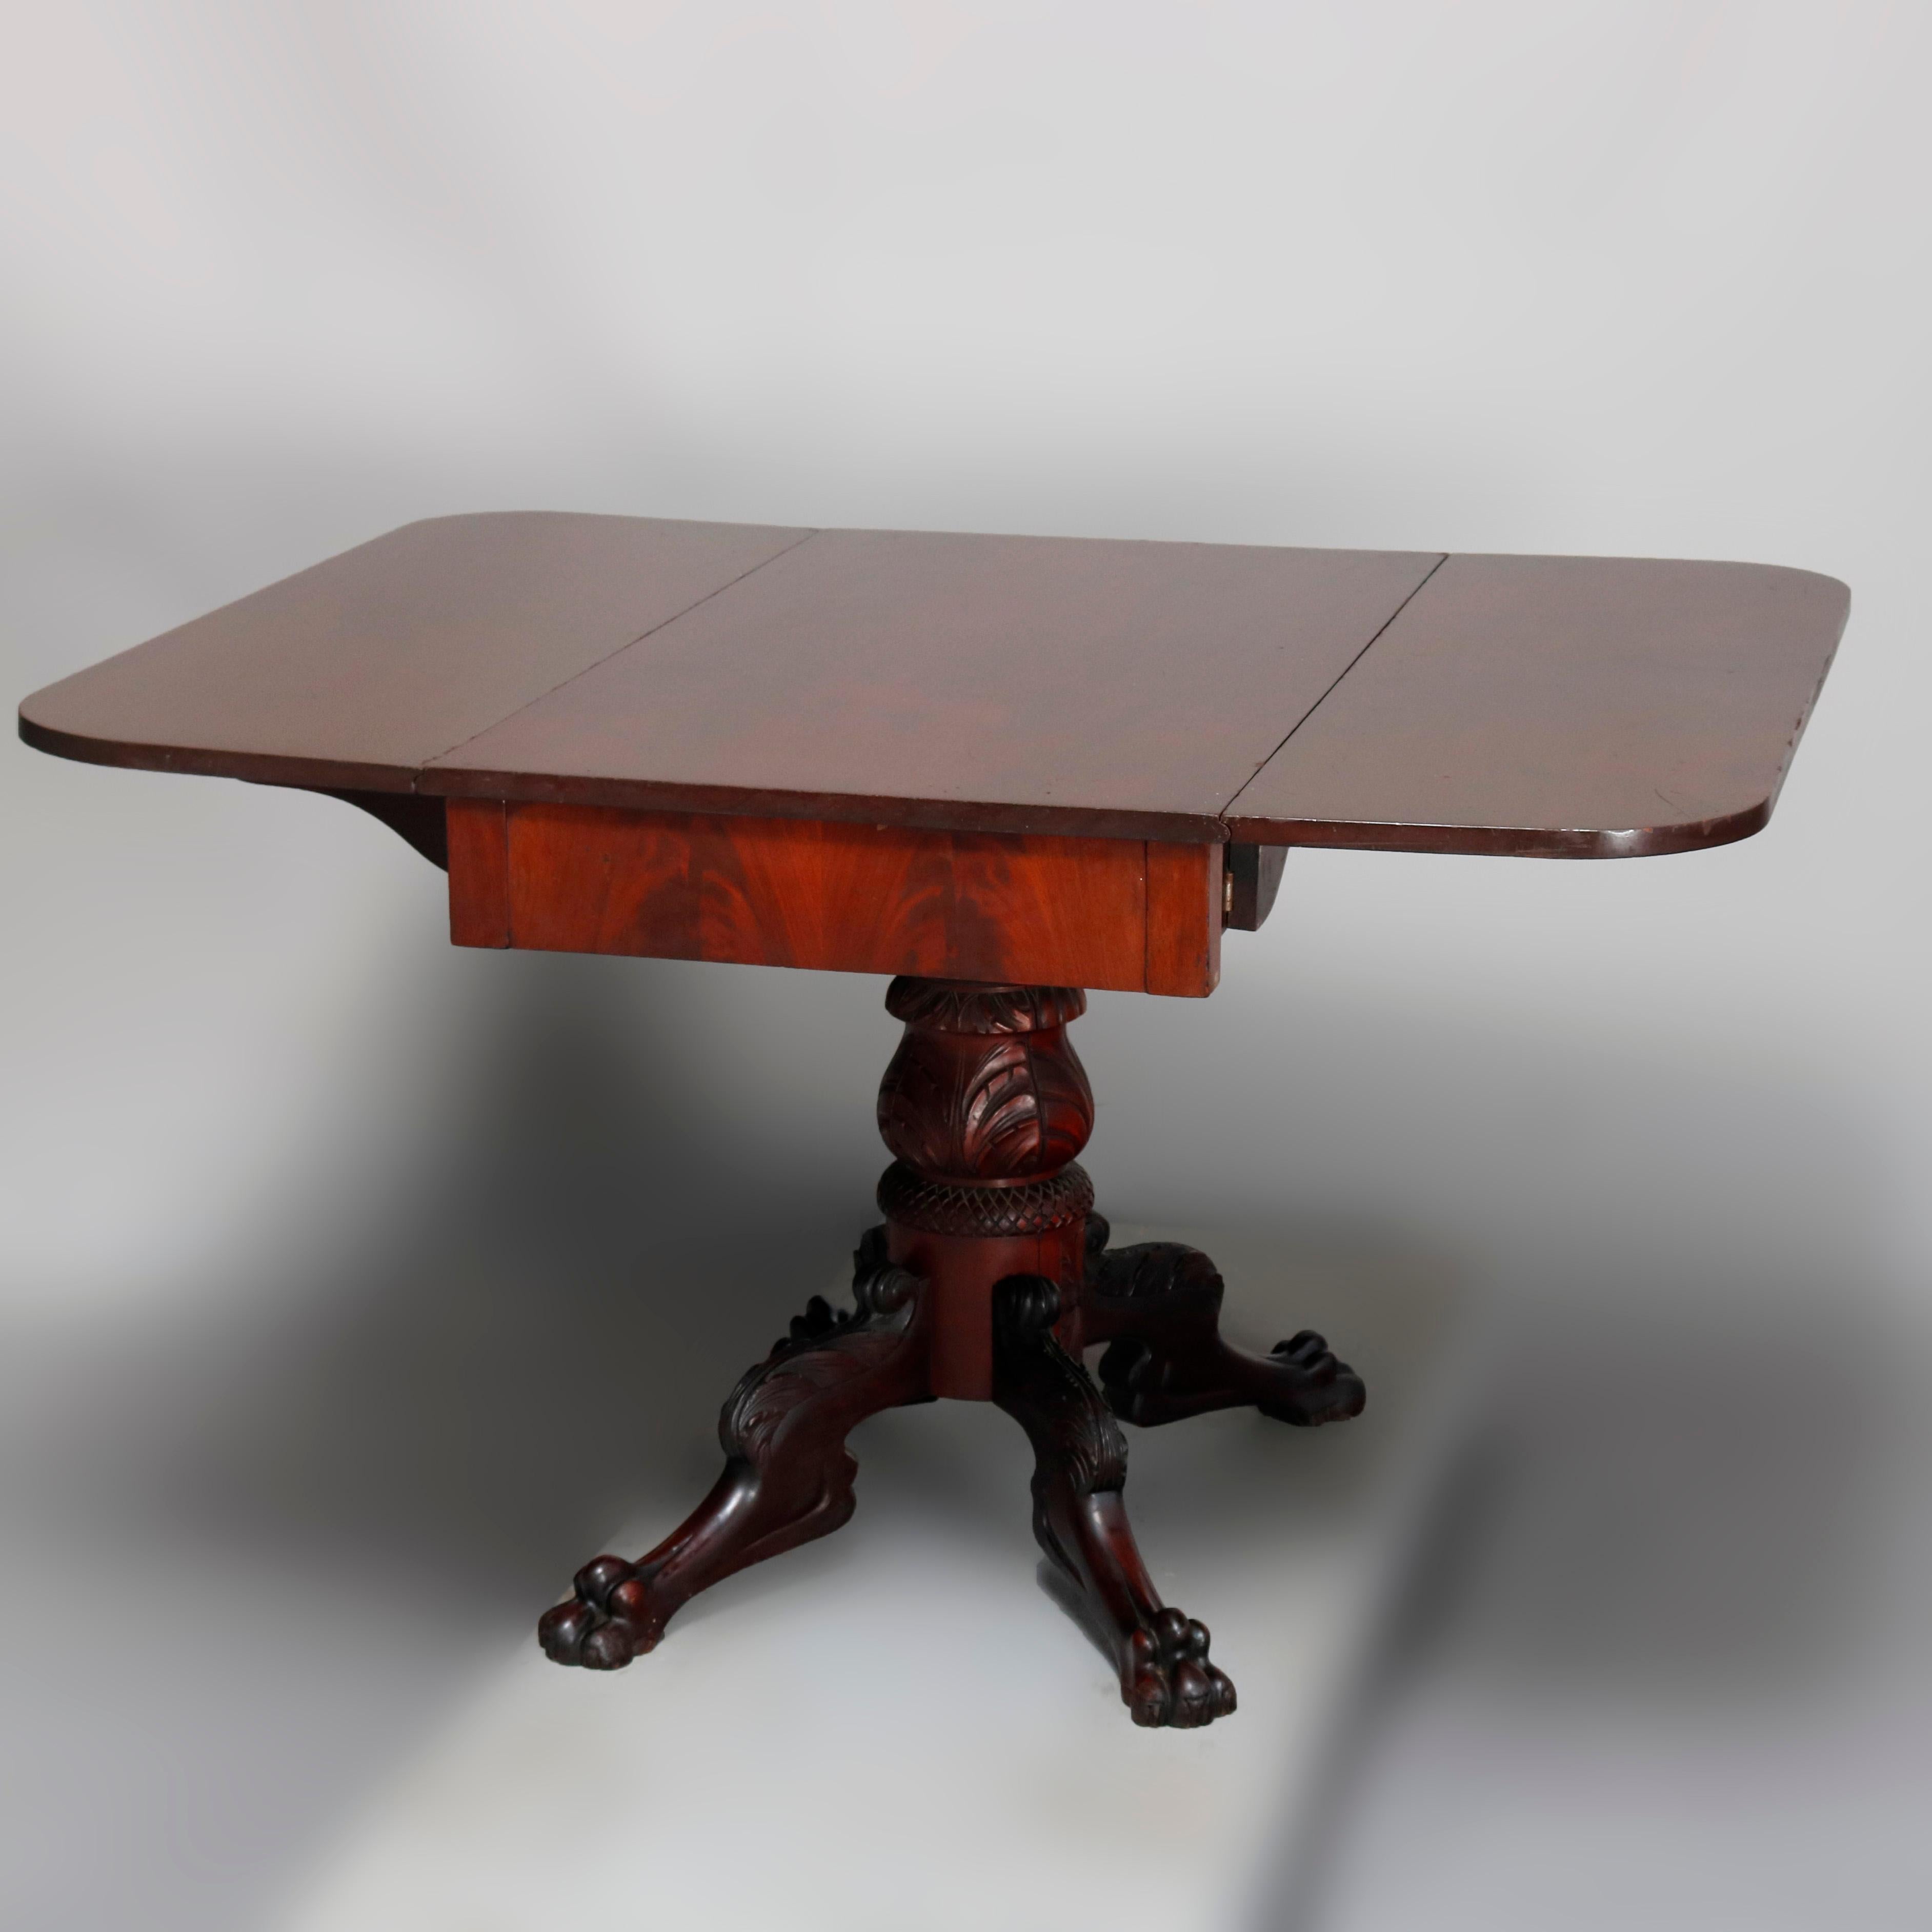 Classical American Empire Carved Mahogany Drop Leaf Dining Table, 19th Century 3